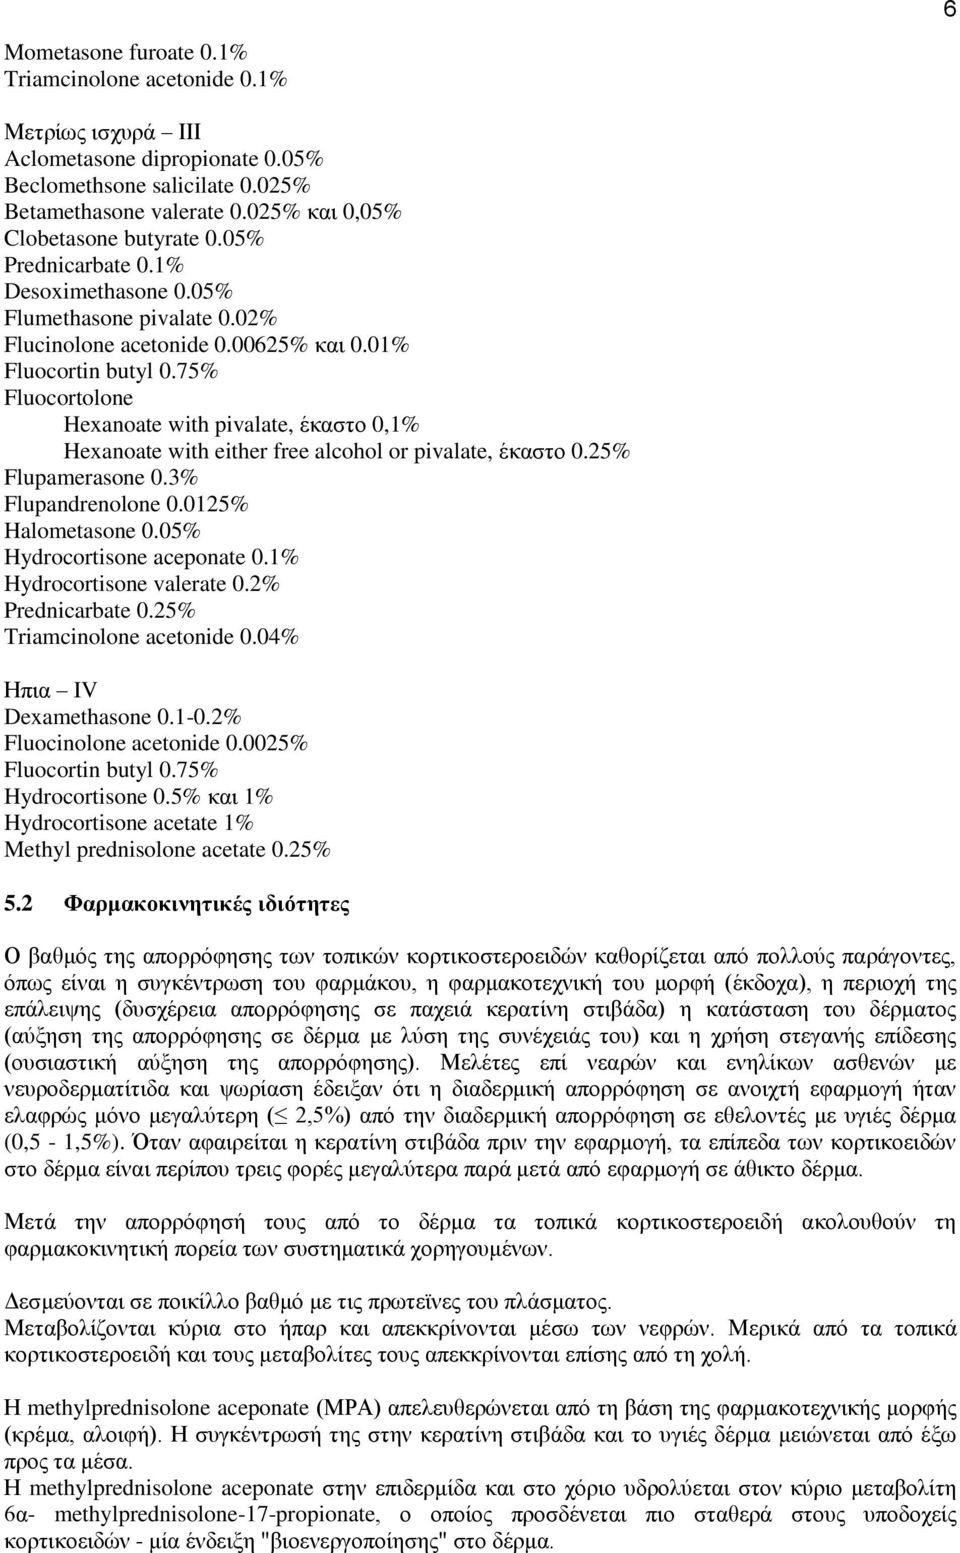 75% Fluocortolone Hexanoate with pivalate, έκαστο 0,1% Hexanoate with either free alcohol or pivalate, έκαστο 0.25% Flupamerasone 0.3% Flupandrenolone 0.0125% Halometasone 0.